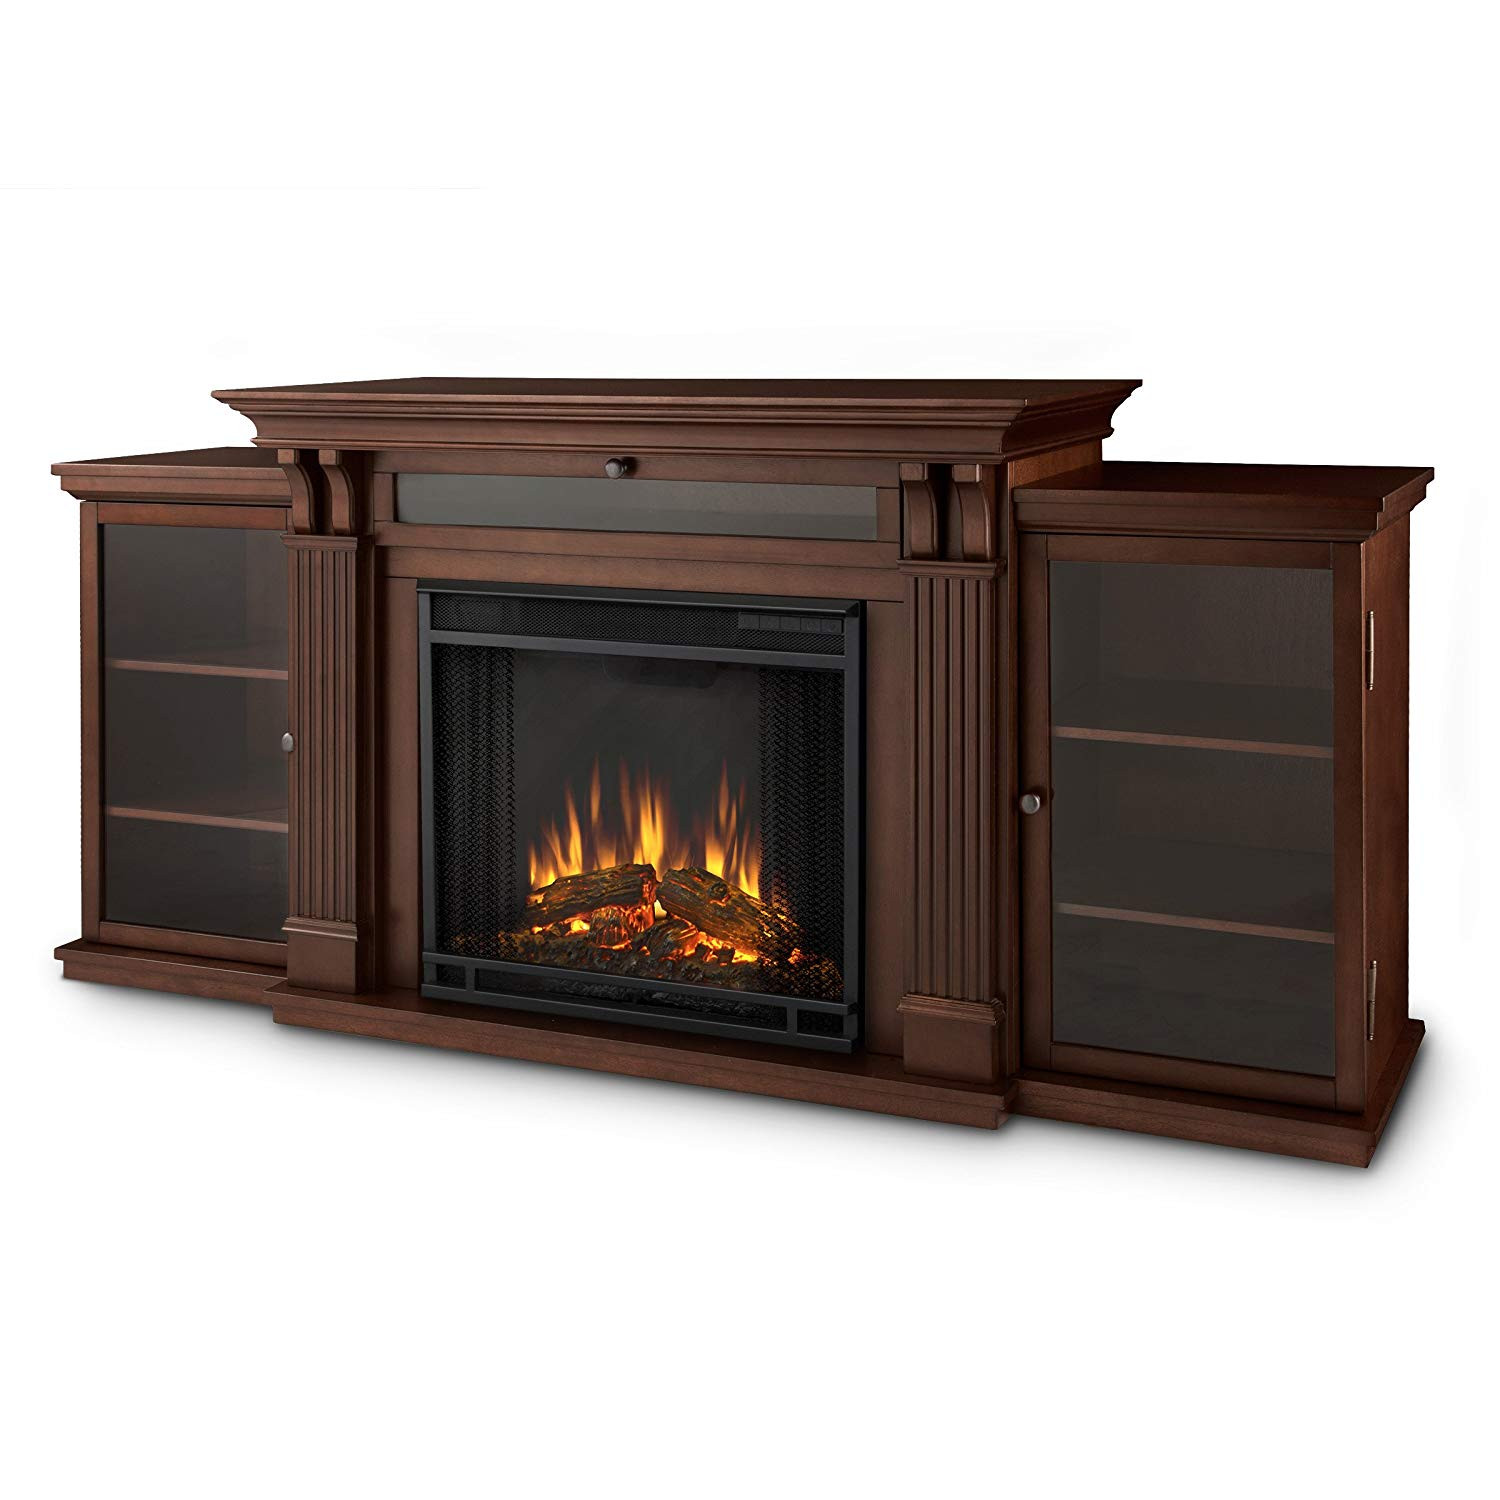 Tv Electric Fireplace
 Top 10 Best Electric Fireplace TV Stand Reviews 2019